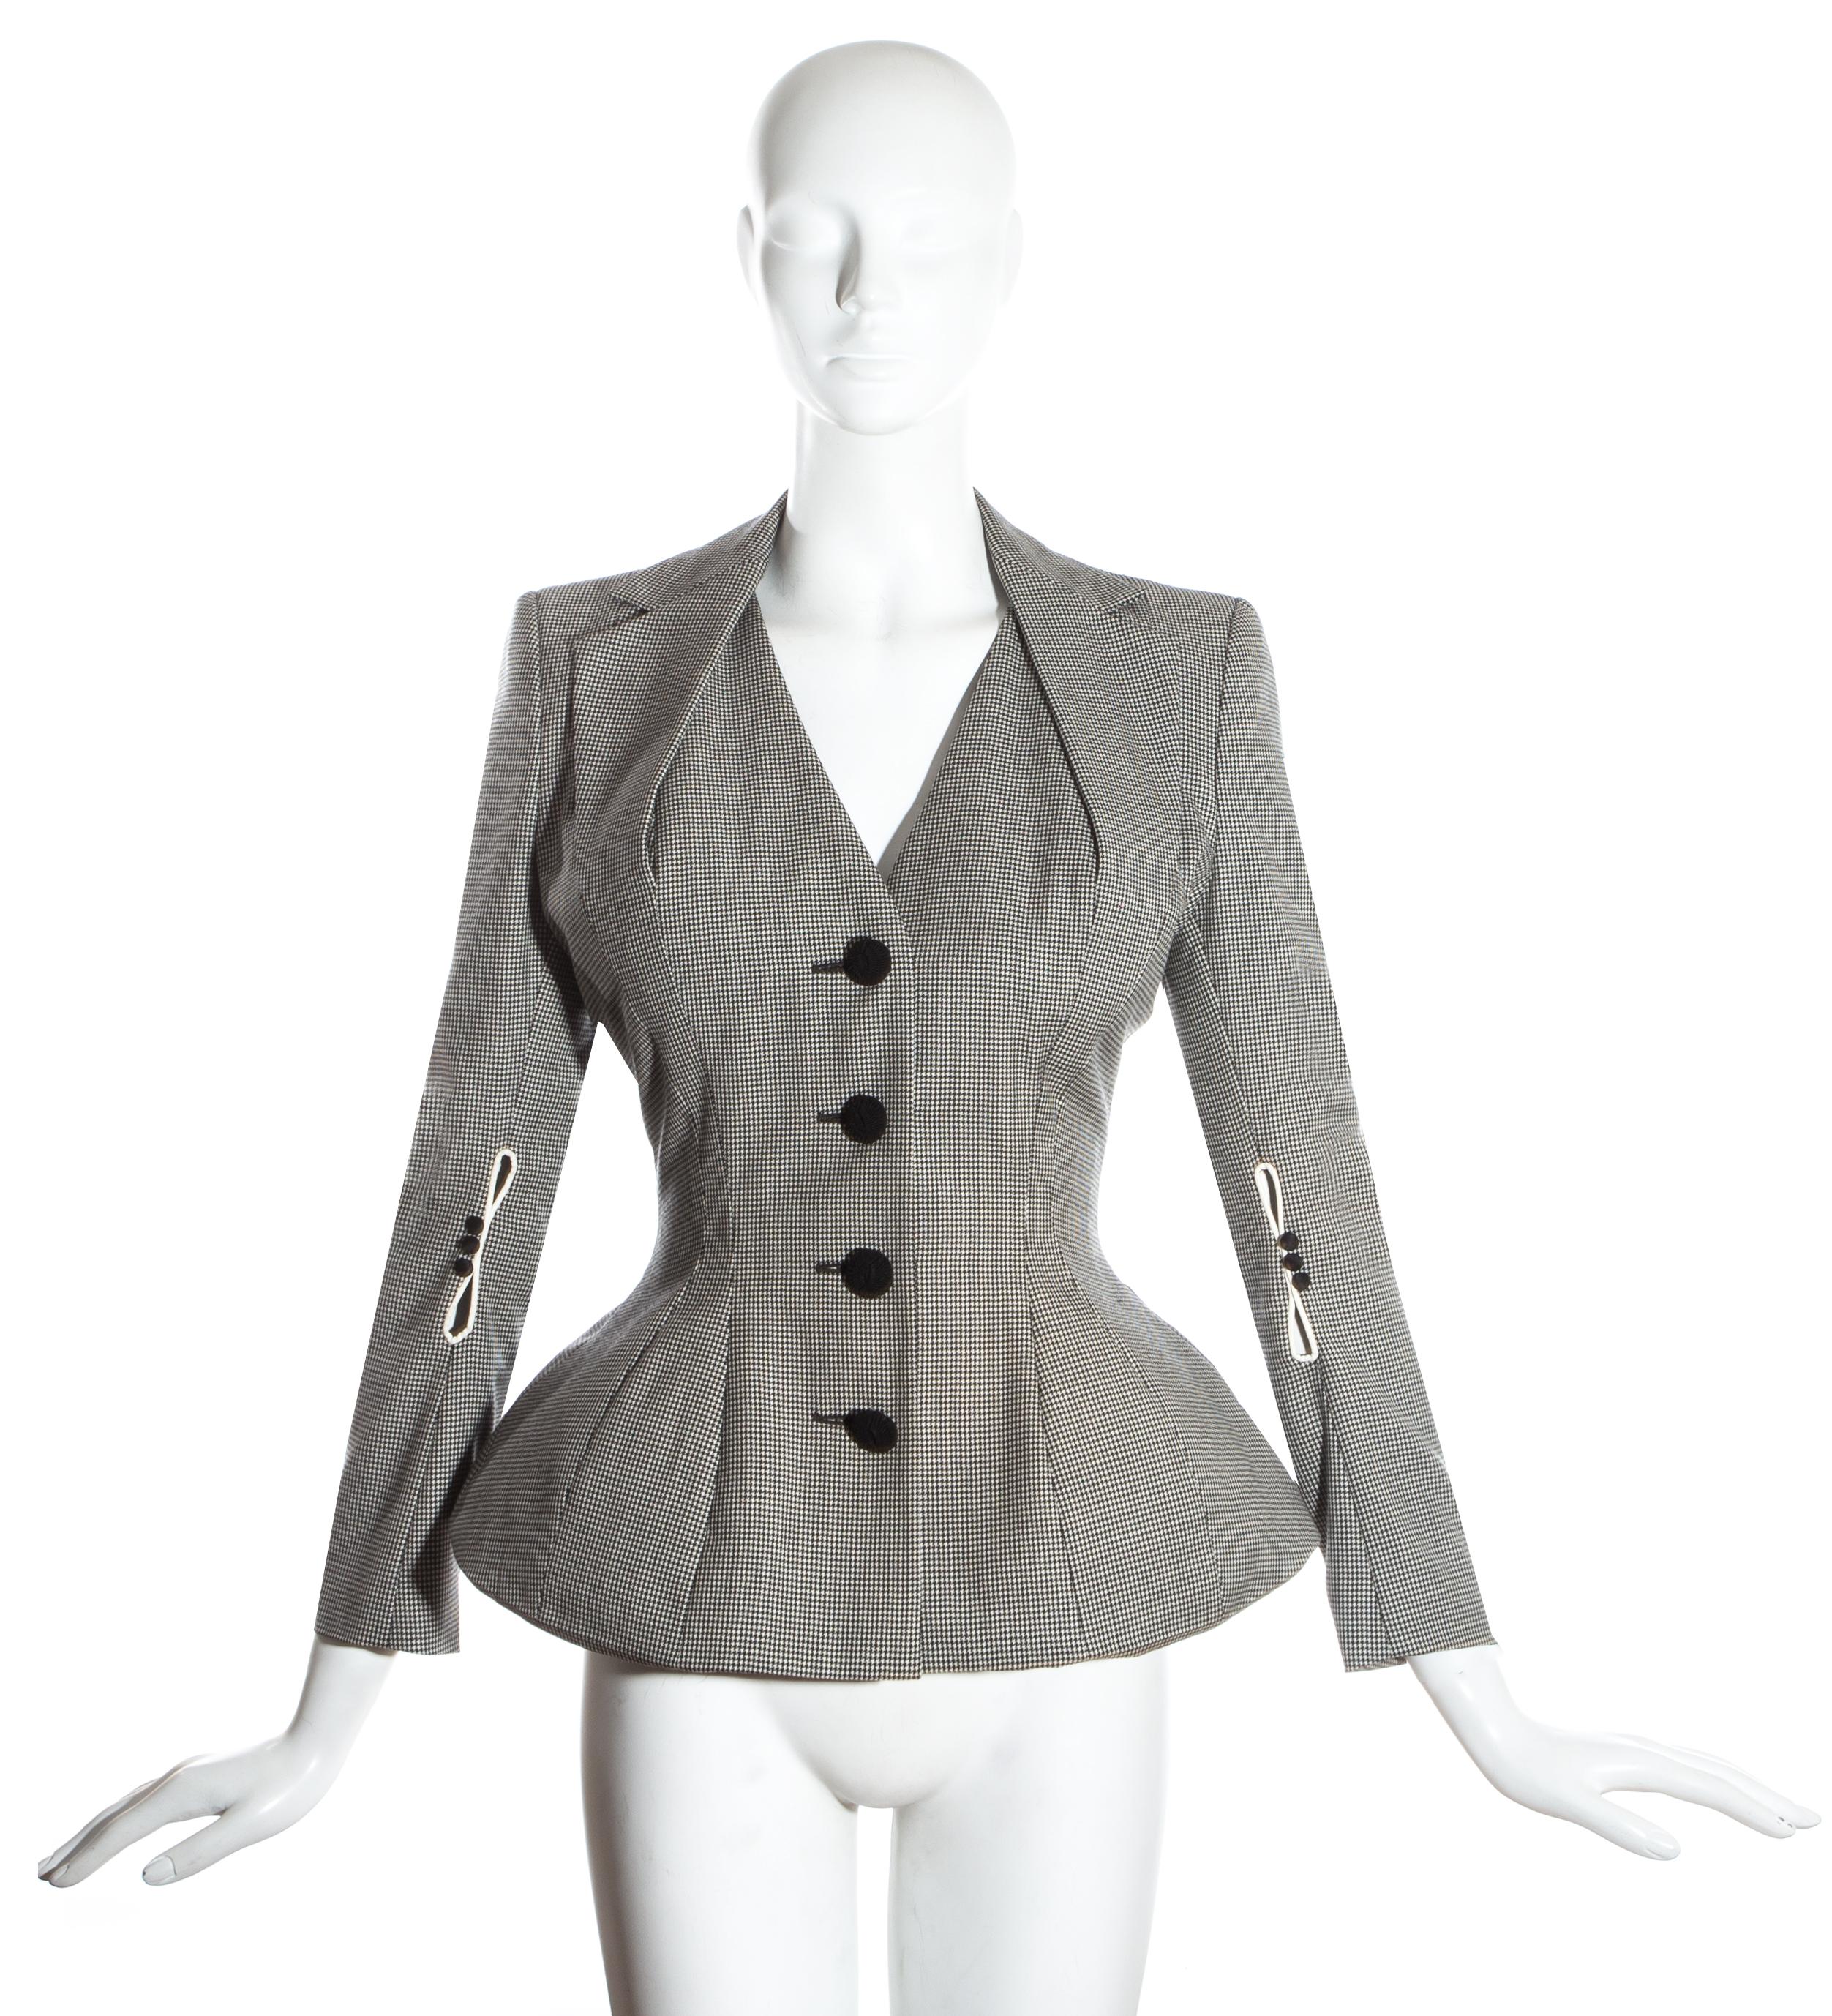 John Galliano hound's tooth check wool jacket with padded shoulders, hips and halter-neck style lapel.  

'Pin-up/Misia Sert' collection, Spring-Summer 1995